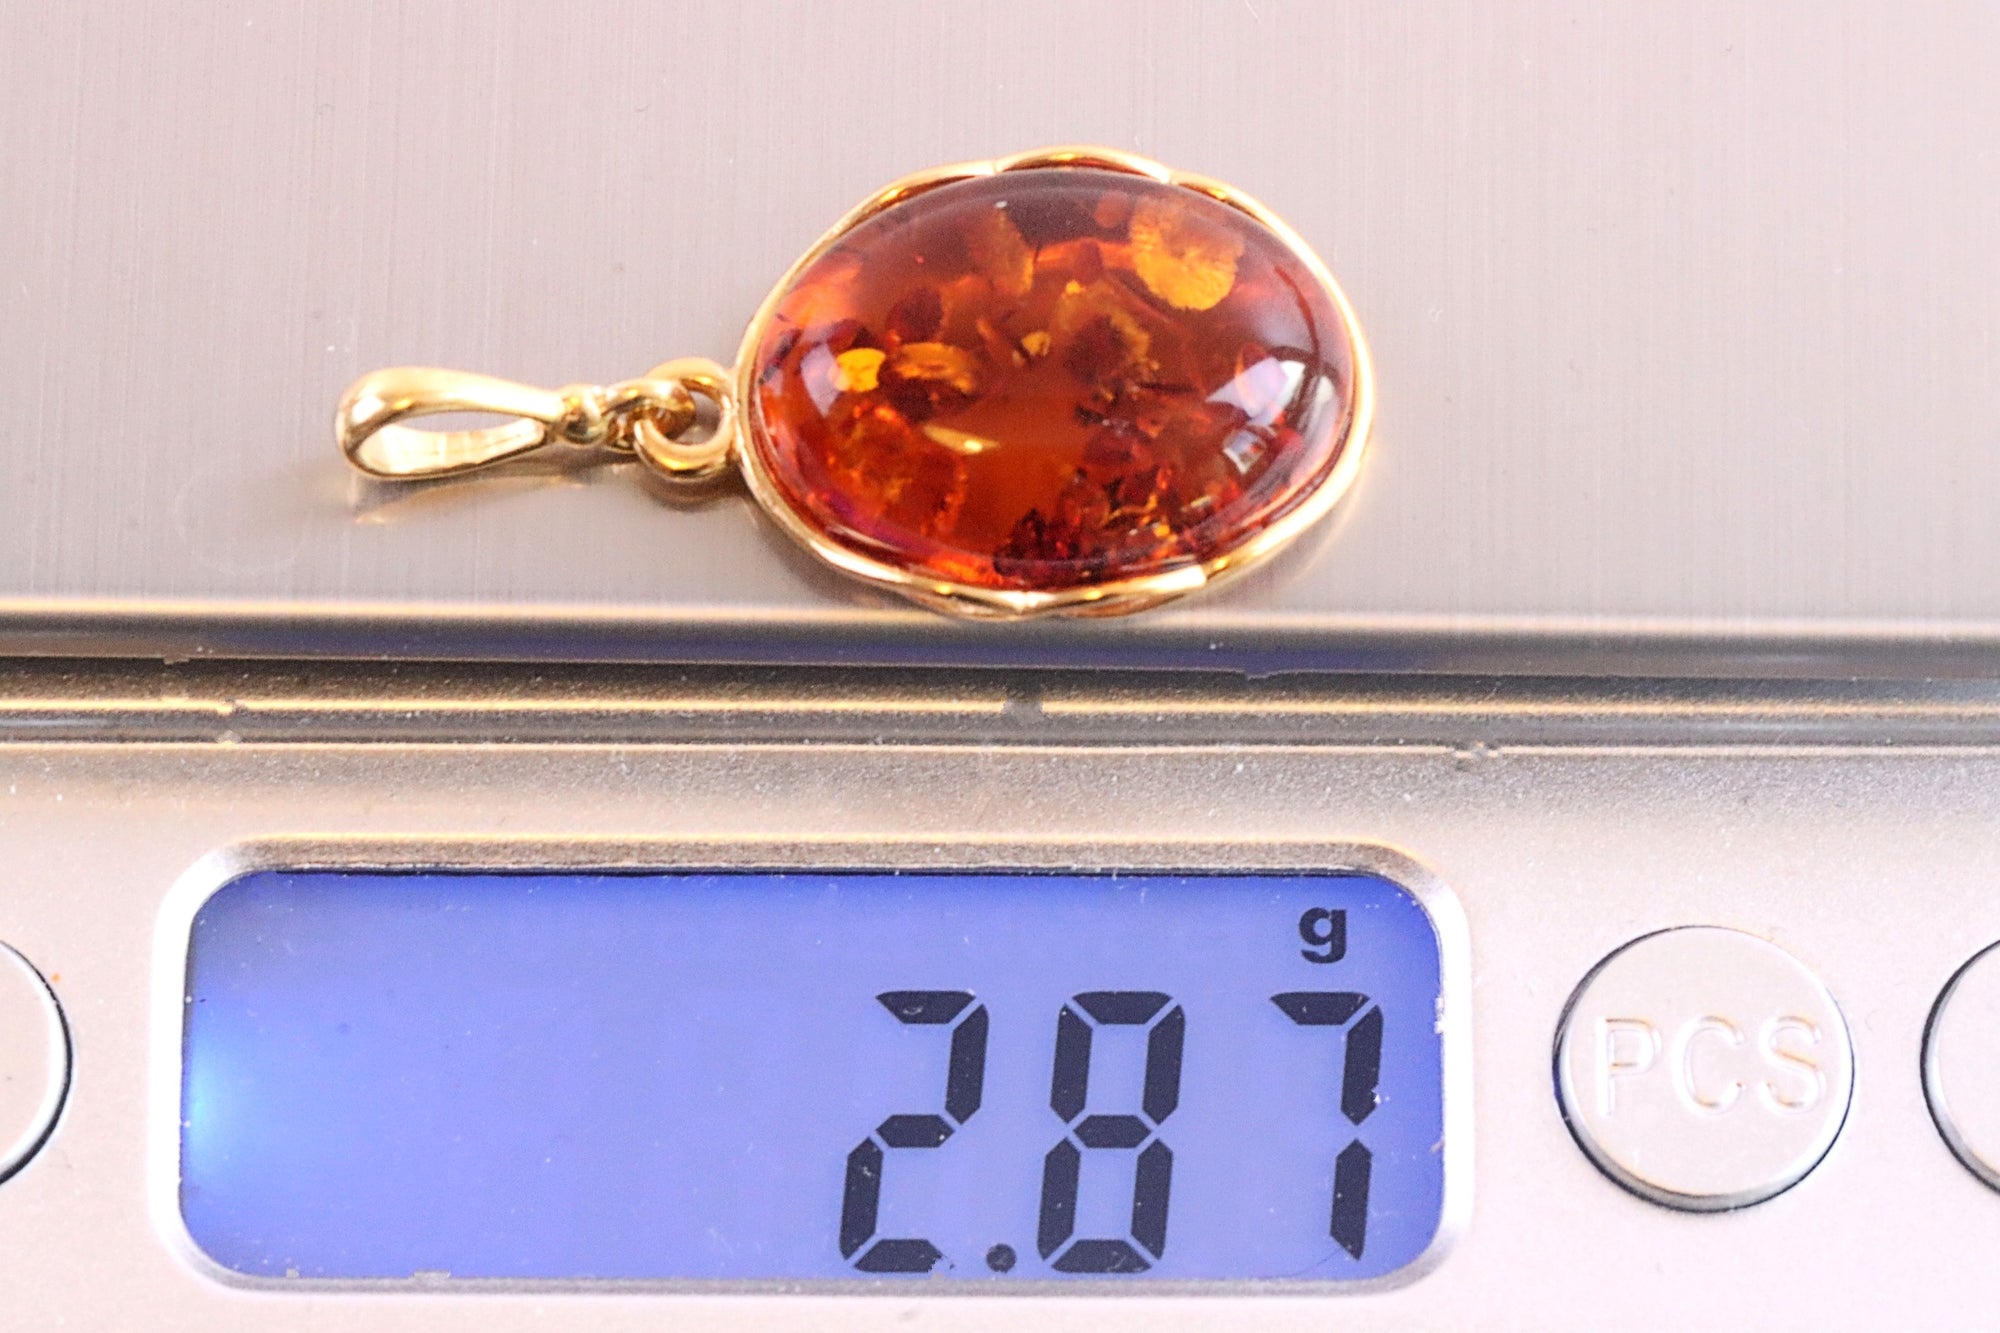 925 Gold Plated Silver Amber Gemstone